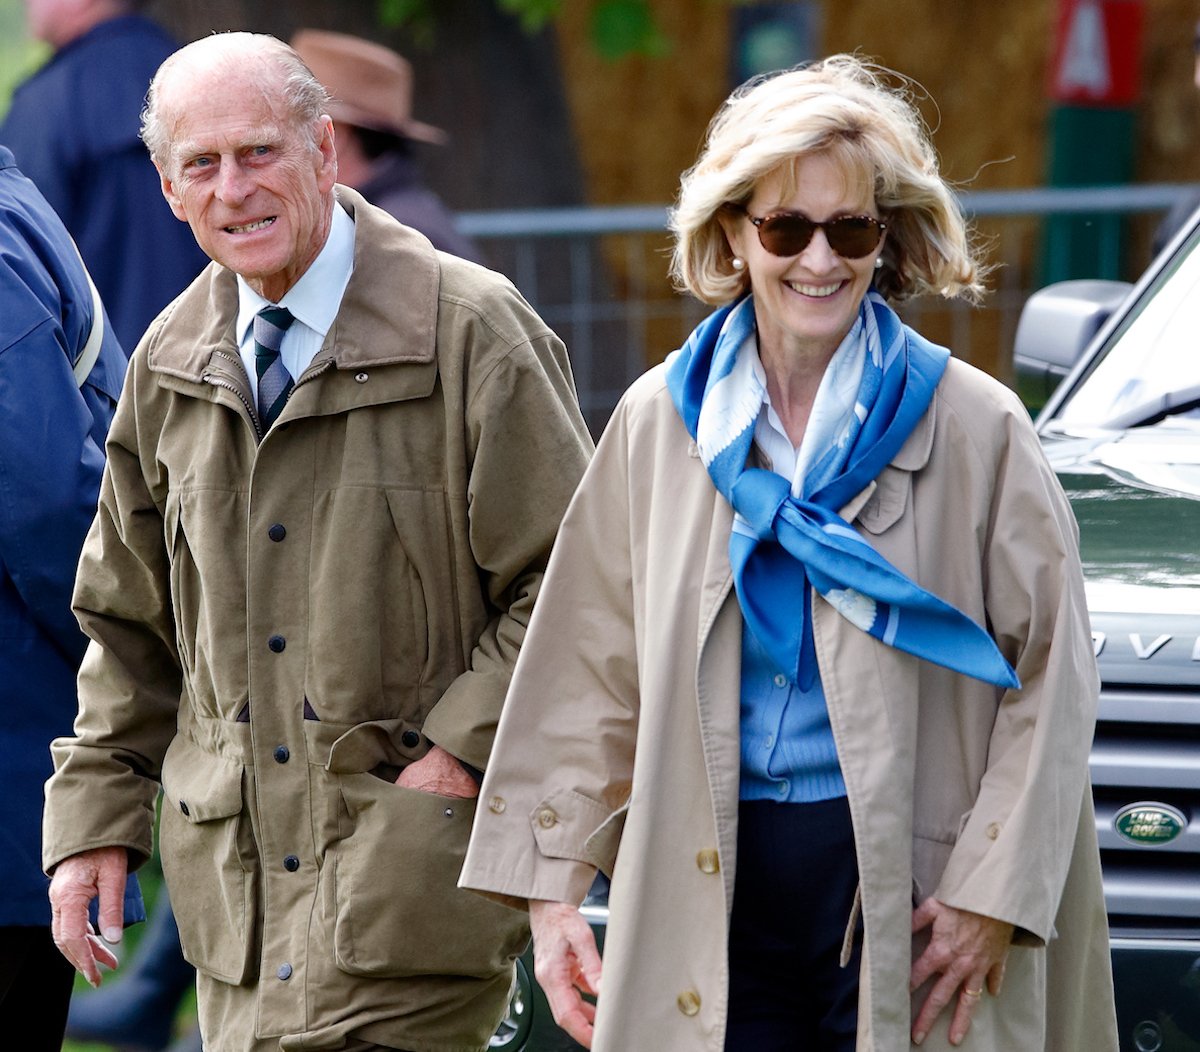 Prince Philip, whose face 'lights up' in photos of him and Penny Knatchbull, according to a body language expert, walks with Penny Knatchbull in 2007